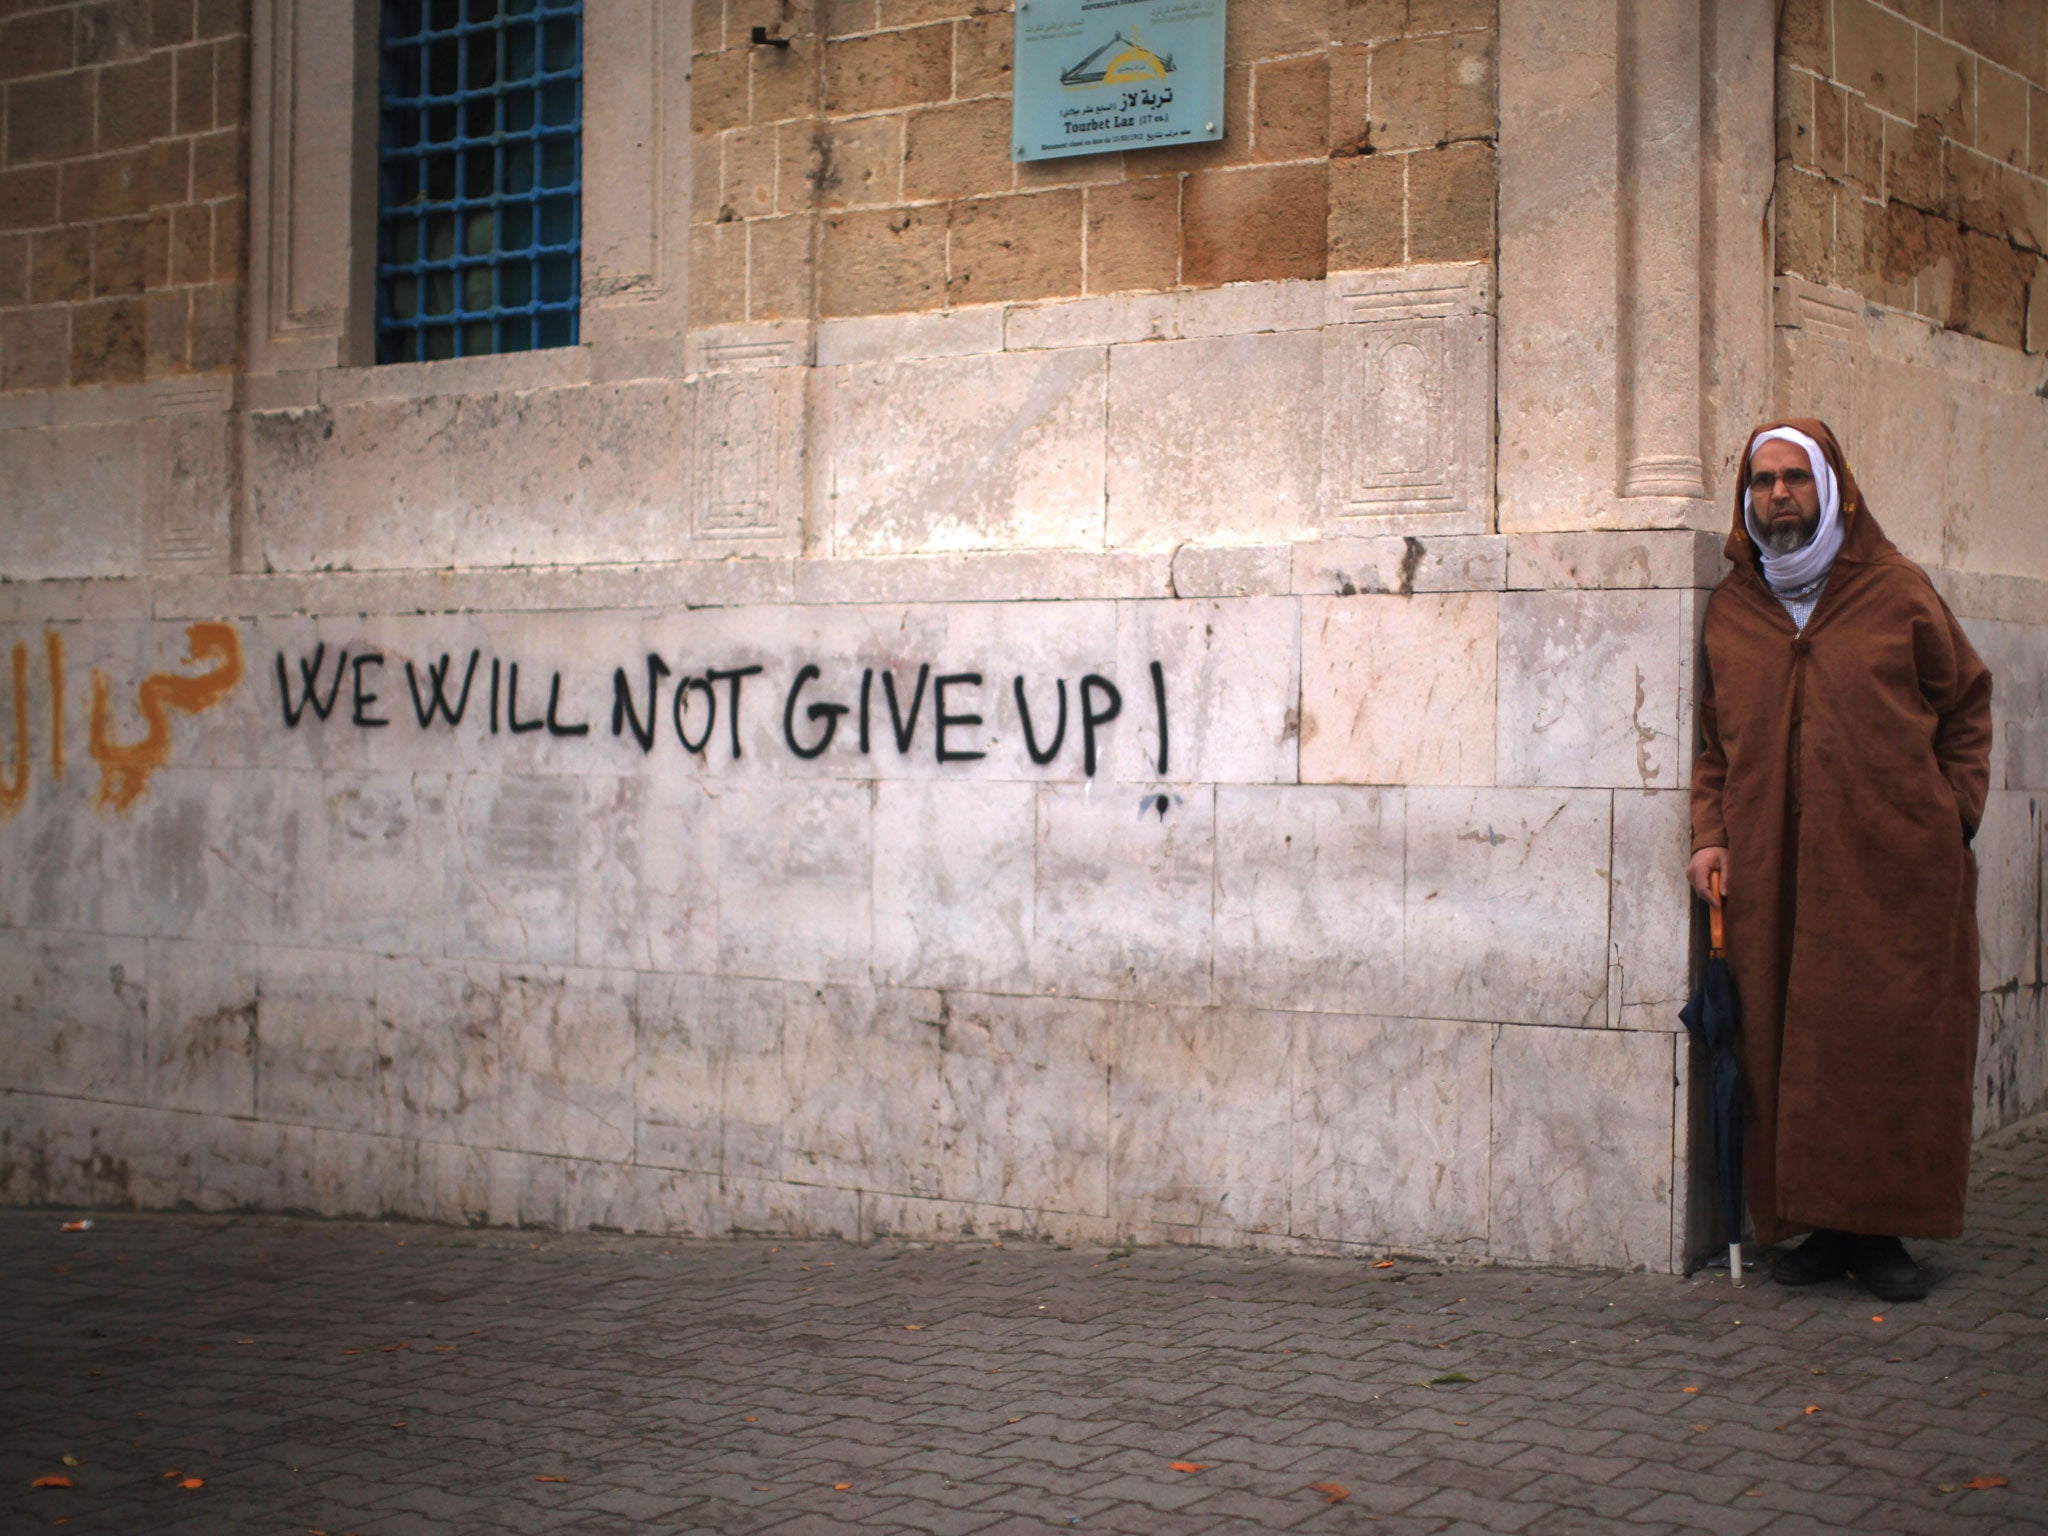 A Tunisian man looks on next to graffiti as protestors continue their demonstrations outside Prime Minister Mohammed Ghannouchi's offices in Government Square Tunis on January 25, 2011 in Tunis, Tunisia.